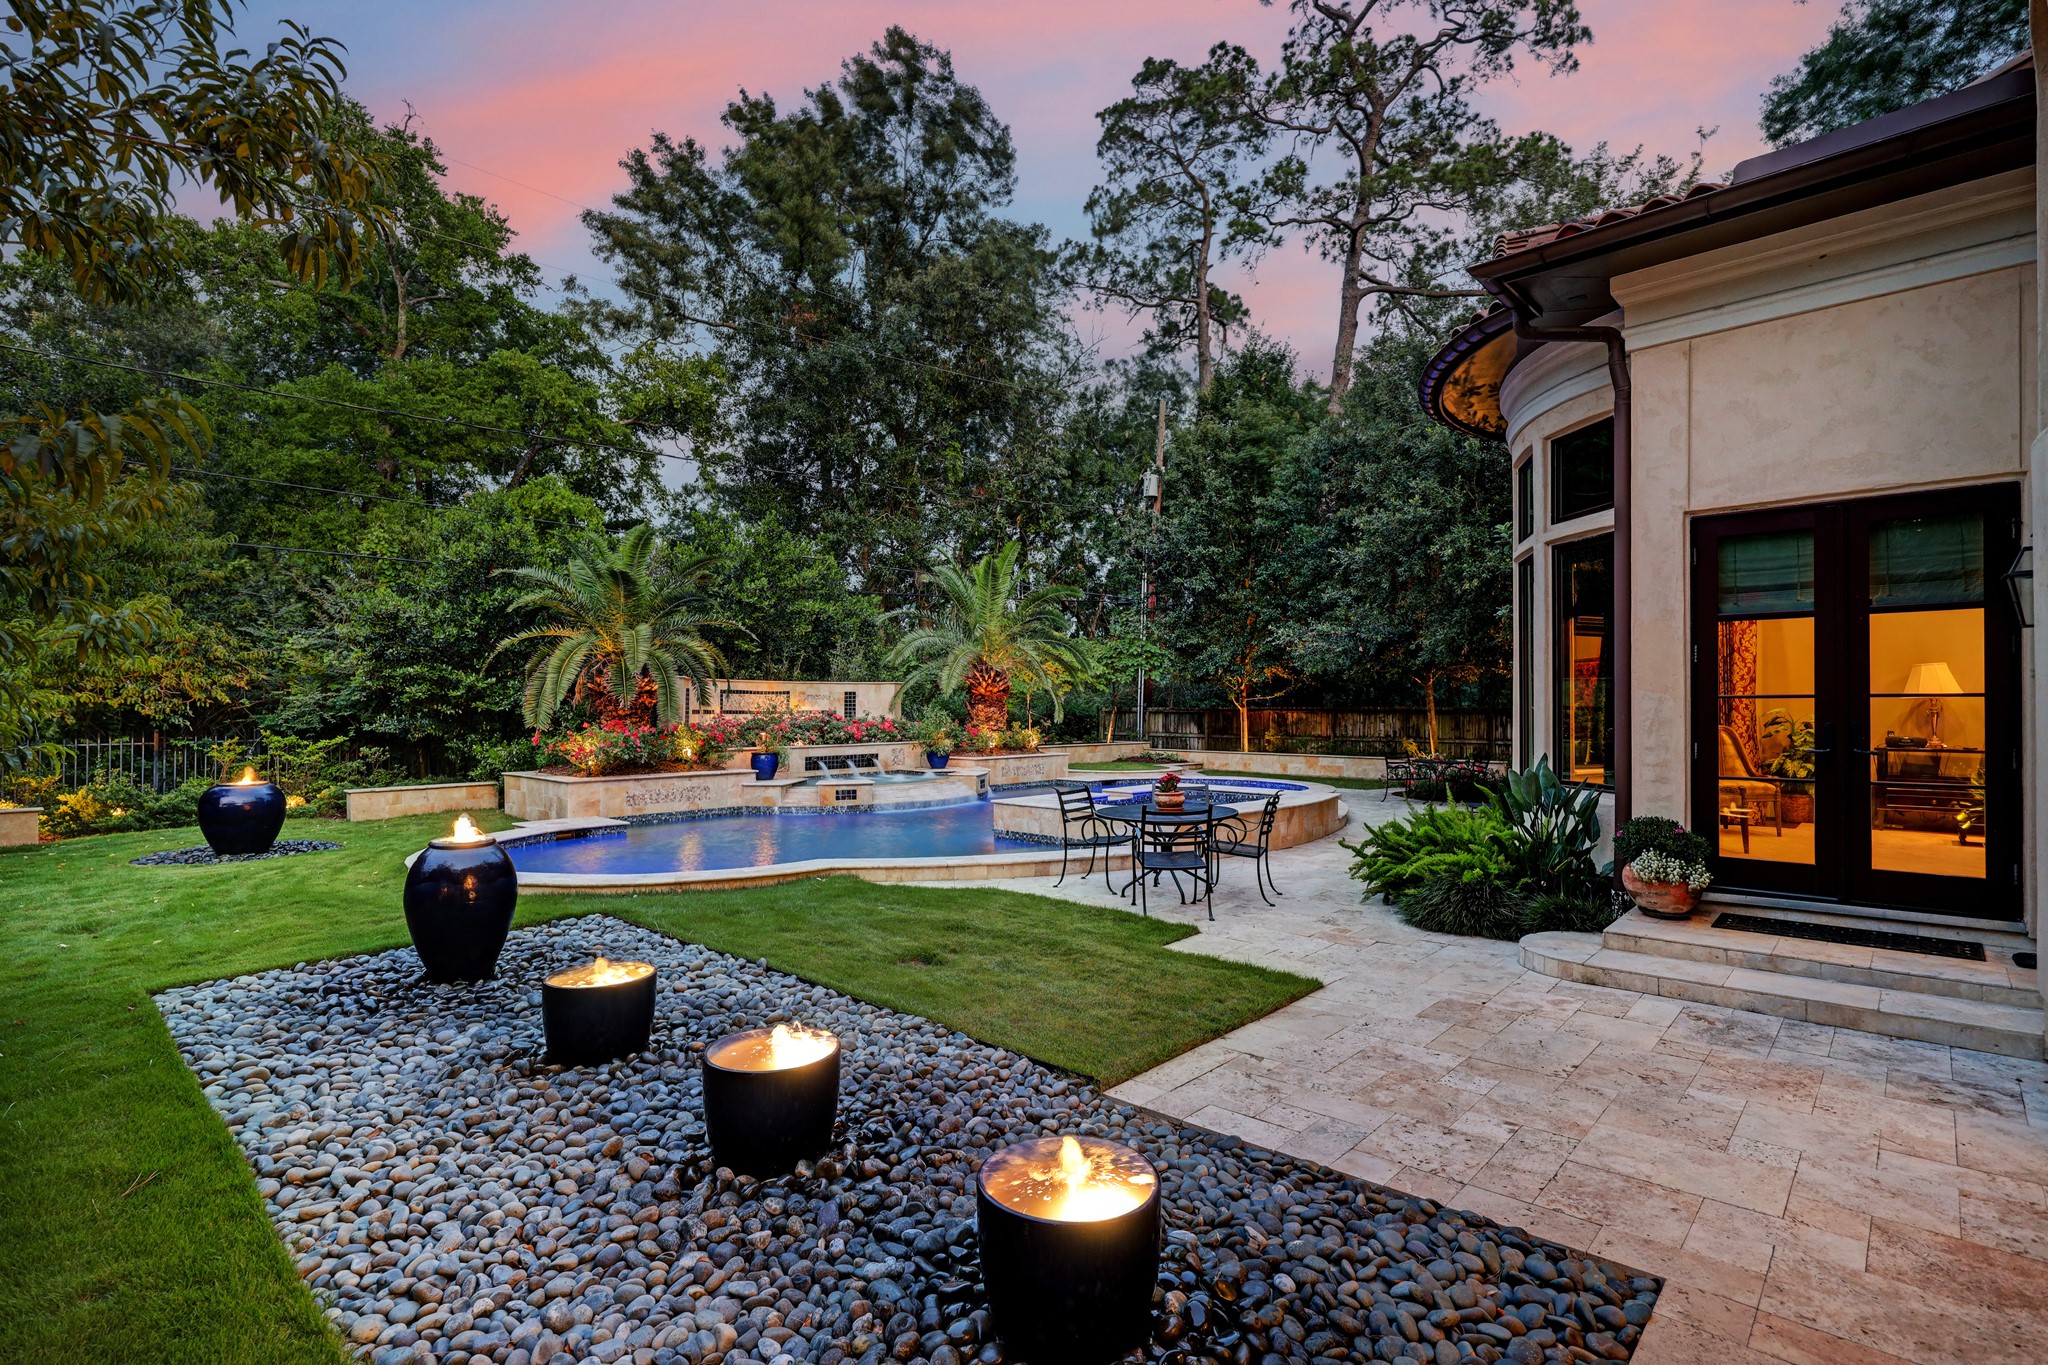 An oasis-like hideaway surrounded by tall privacy hedges and extensive manicured landscaping